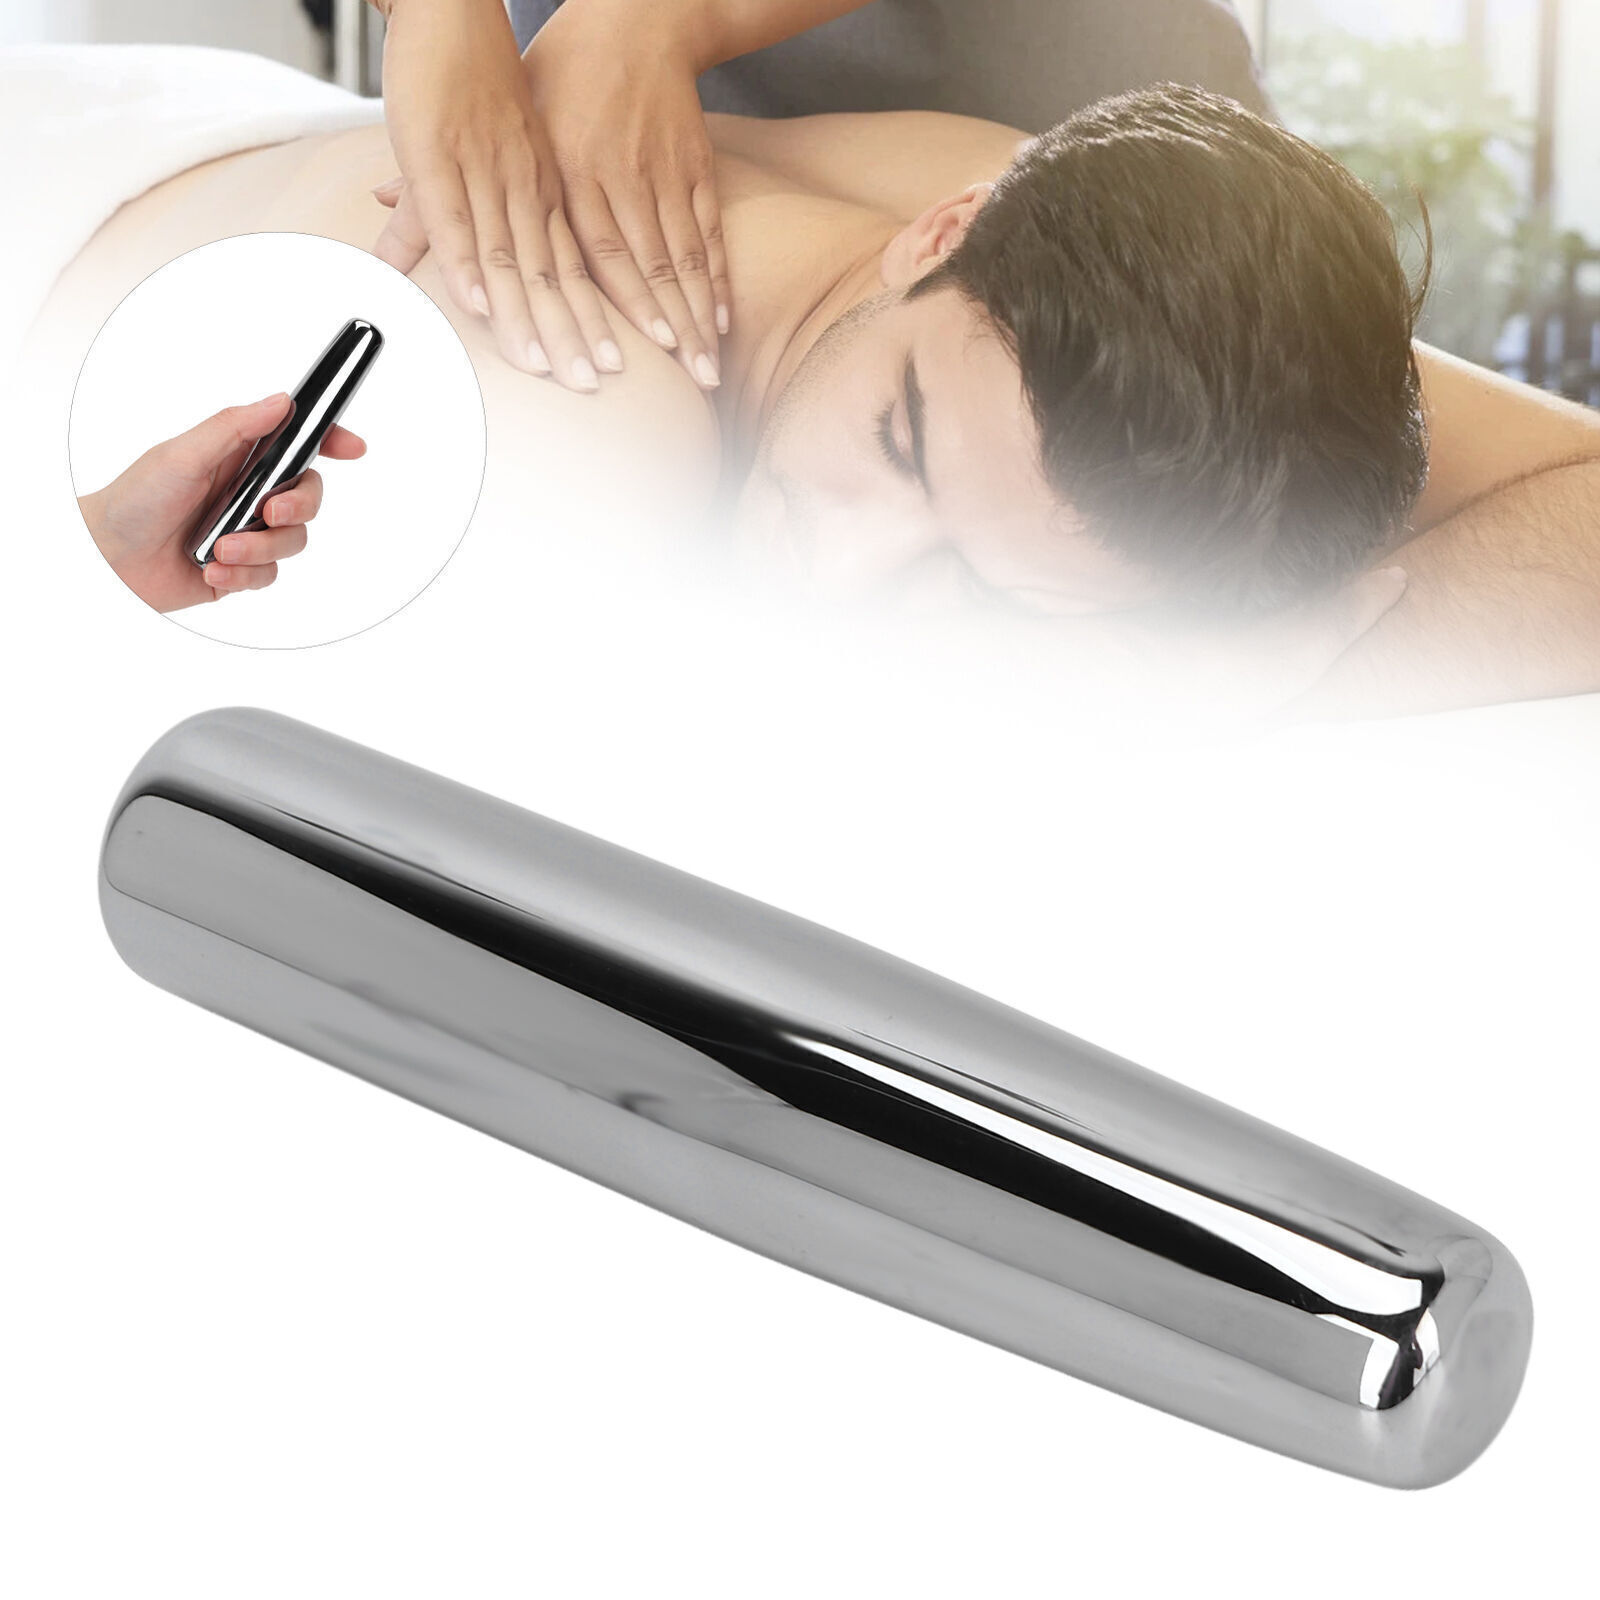 Terahertz Energy Stone Massage Wand Women Facial Skin Care Acupuncture Point